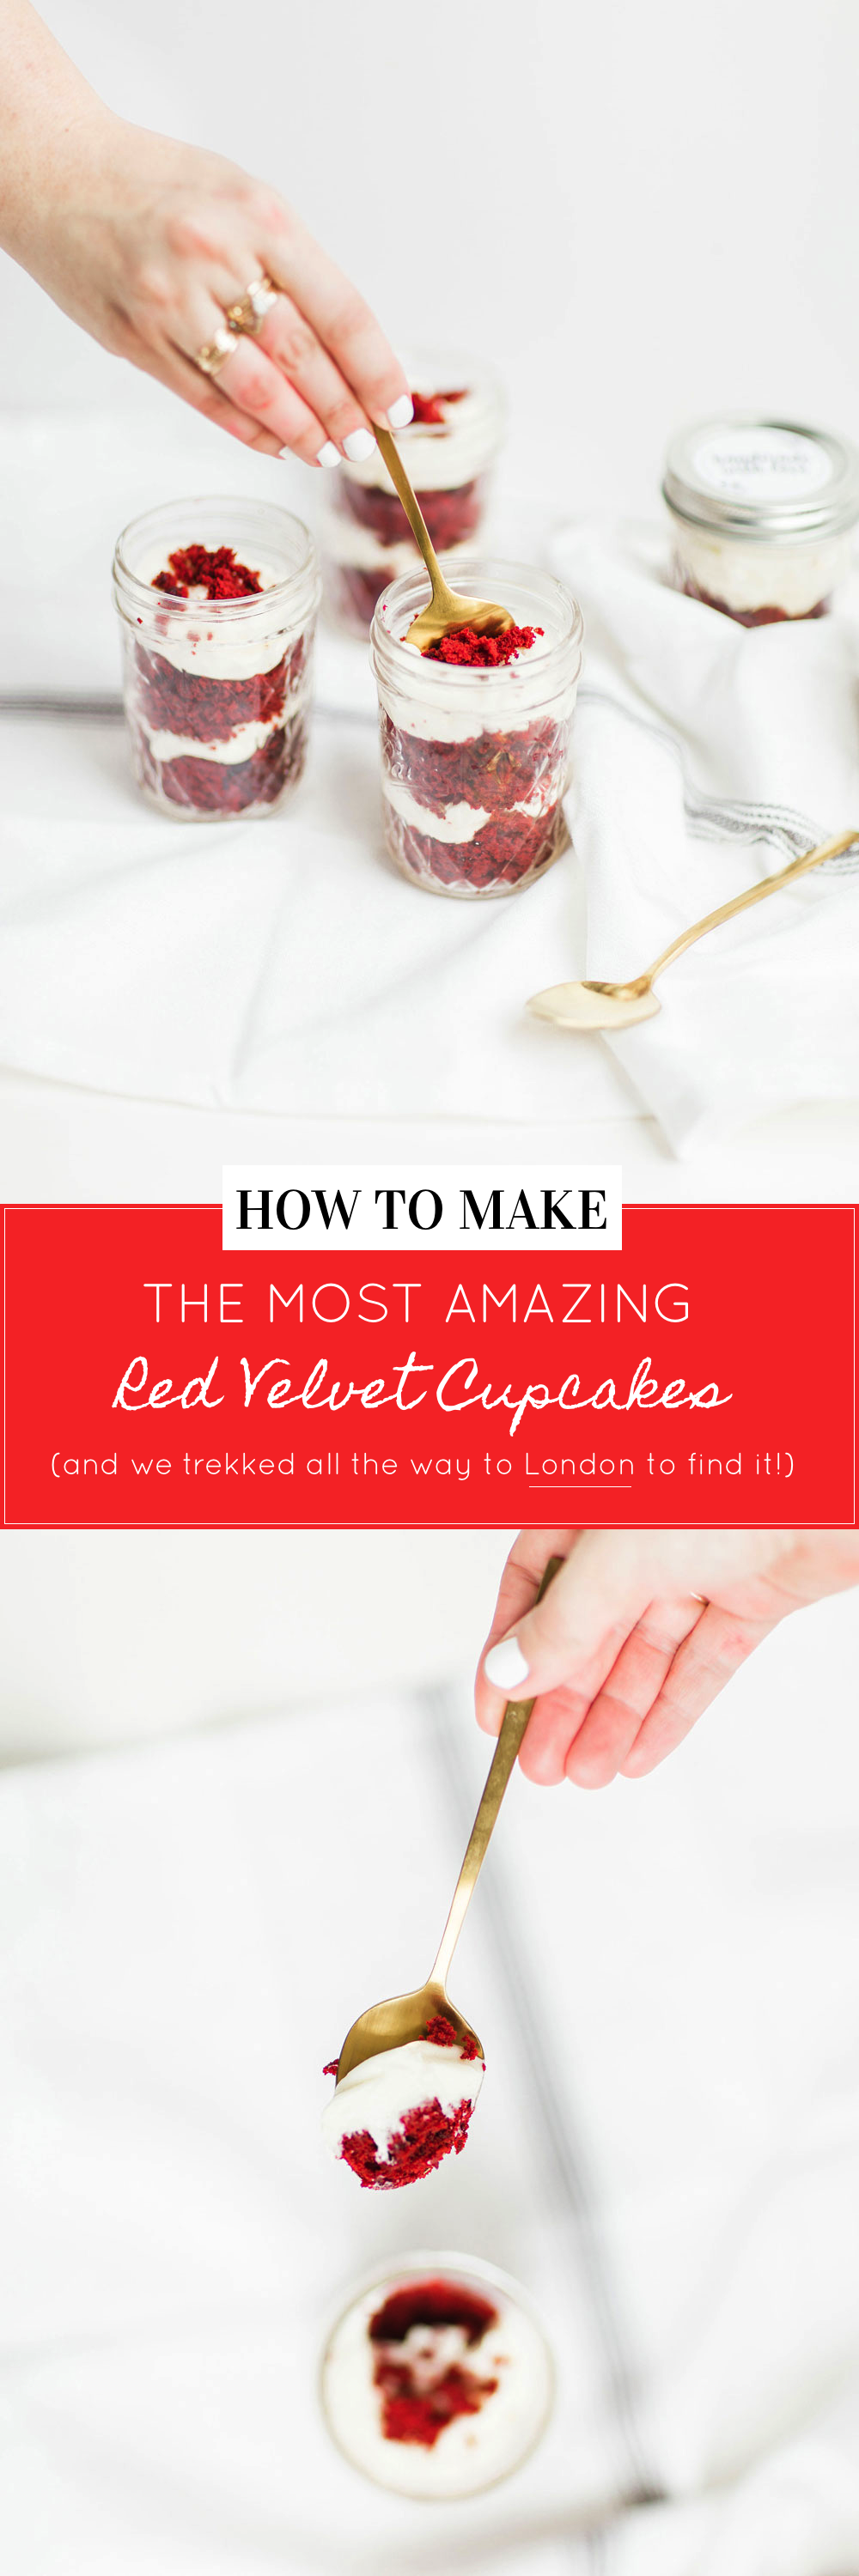 How to make my absolute FAVORITE moist red velvet cupcakes. Put them in jars for the sweetest gift! Click through for the recipe. | glitterinc.com | @glitterinc